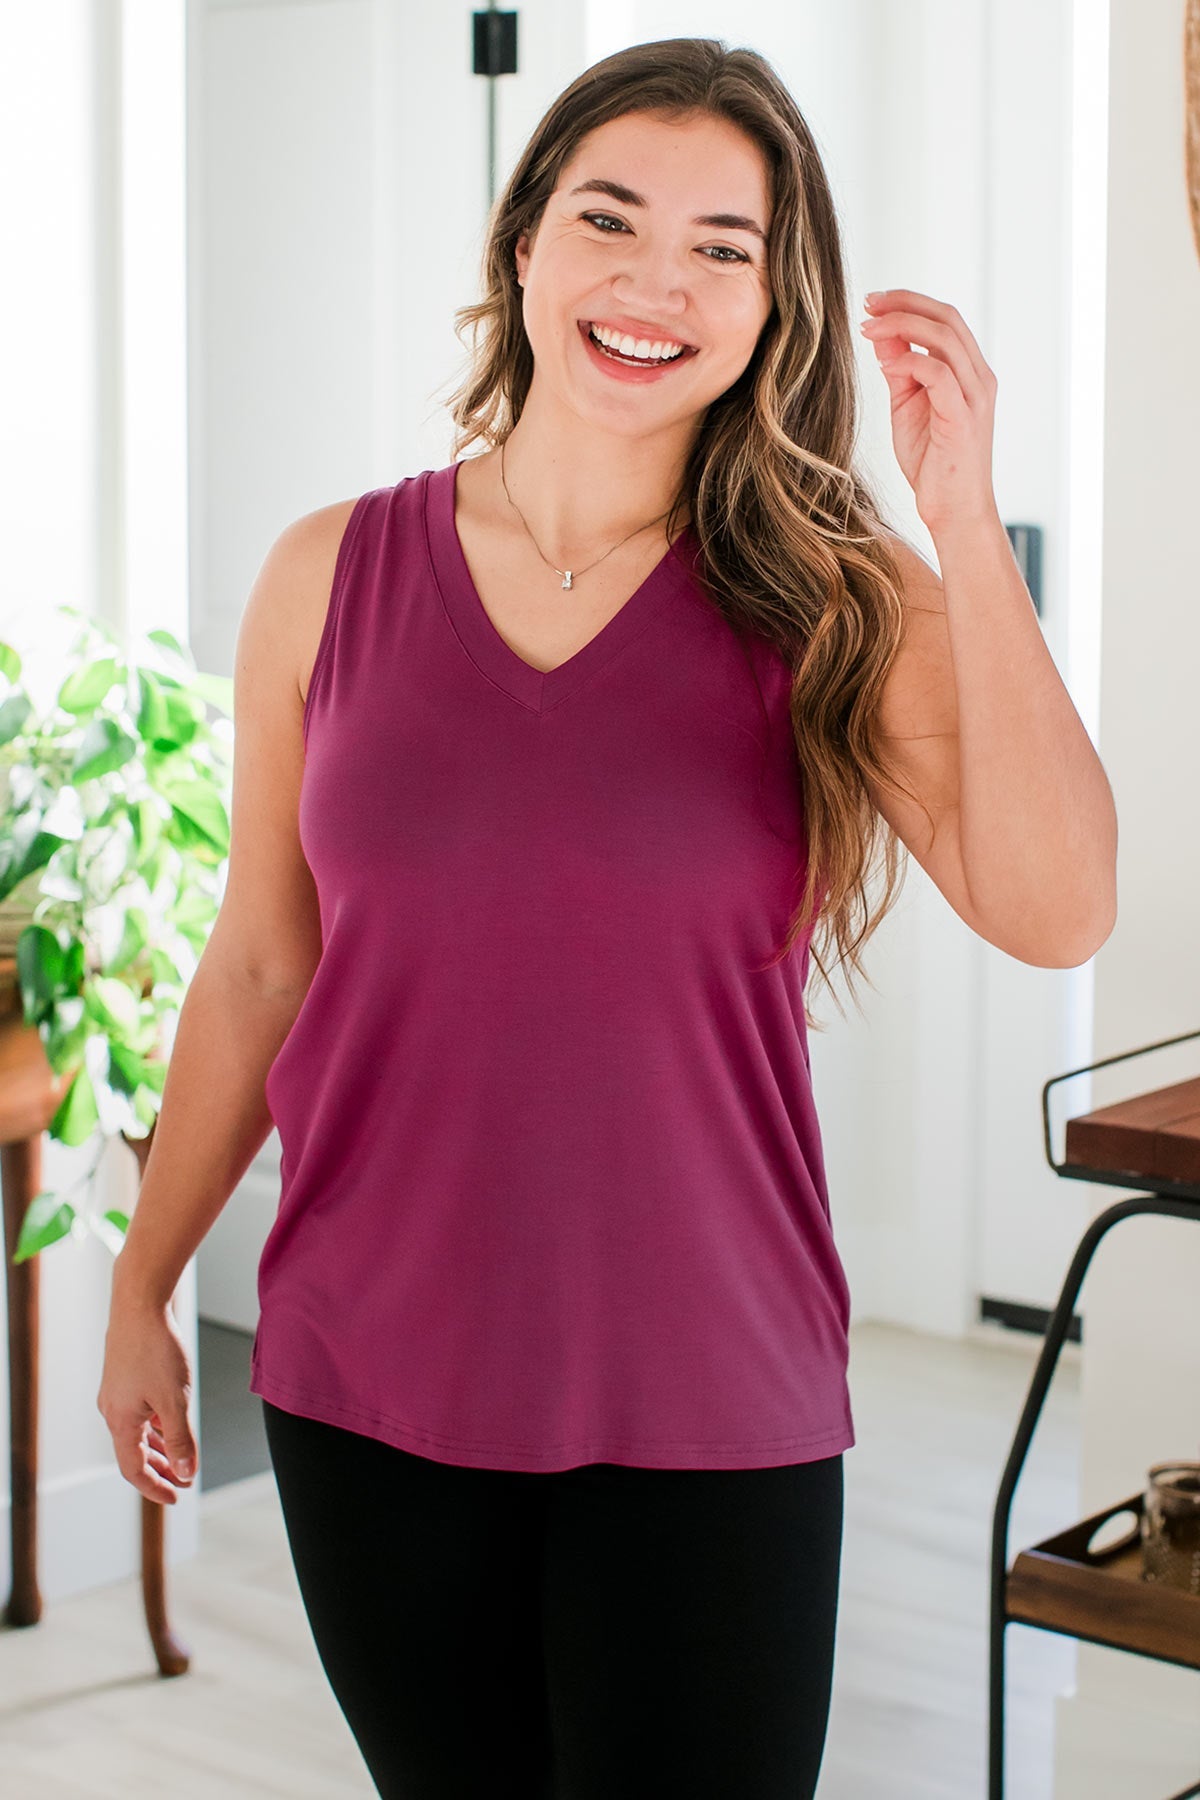 A woman standing with on hand raised towards her hair and a smile on her face, wearing Ginger V-Neck Racerback Bamboo Tank Top in Boysenberry